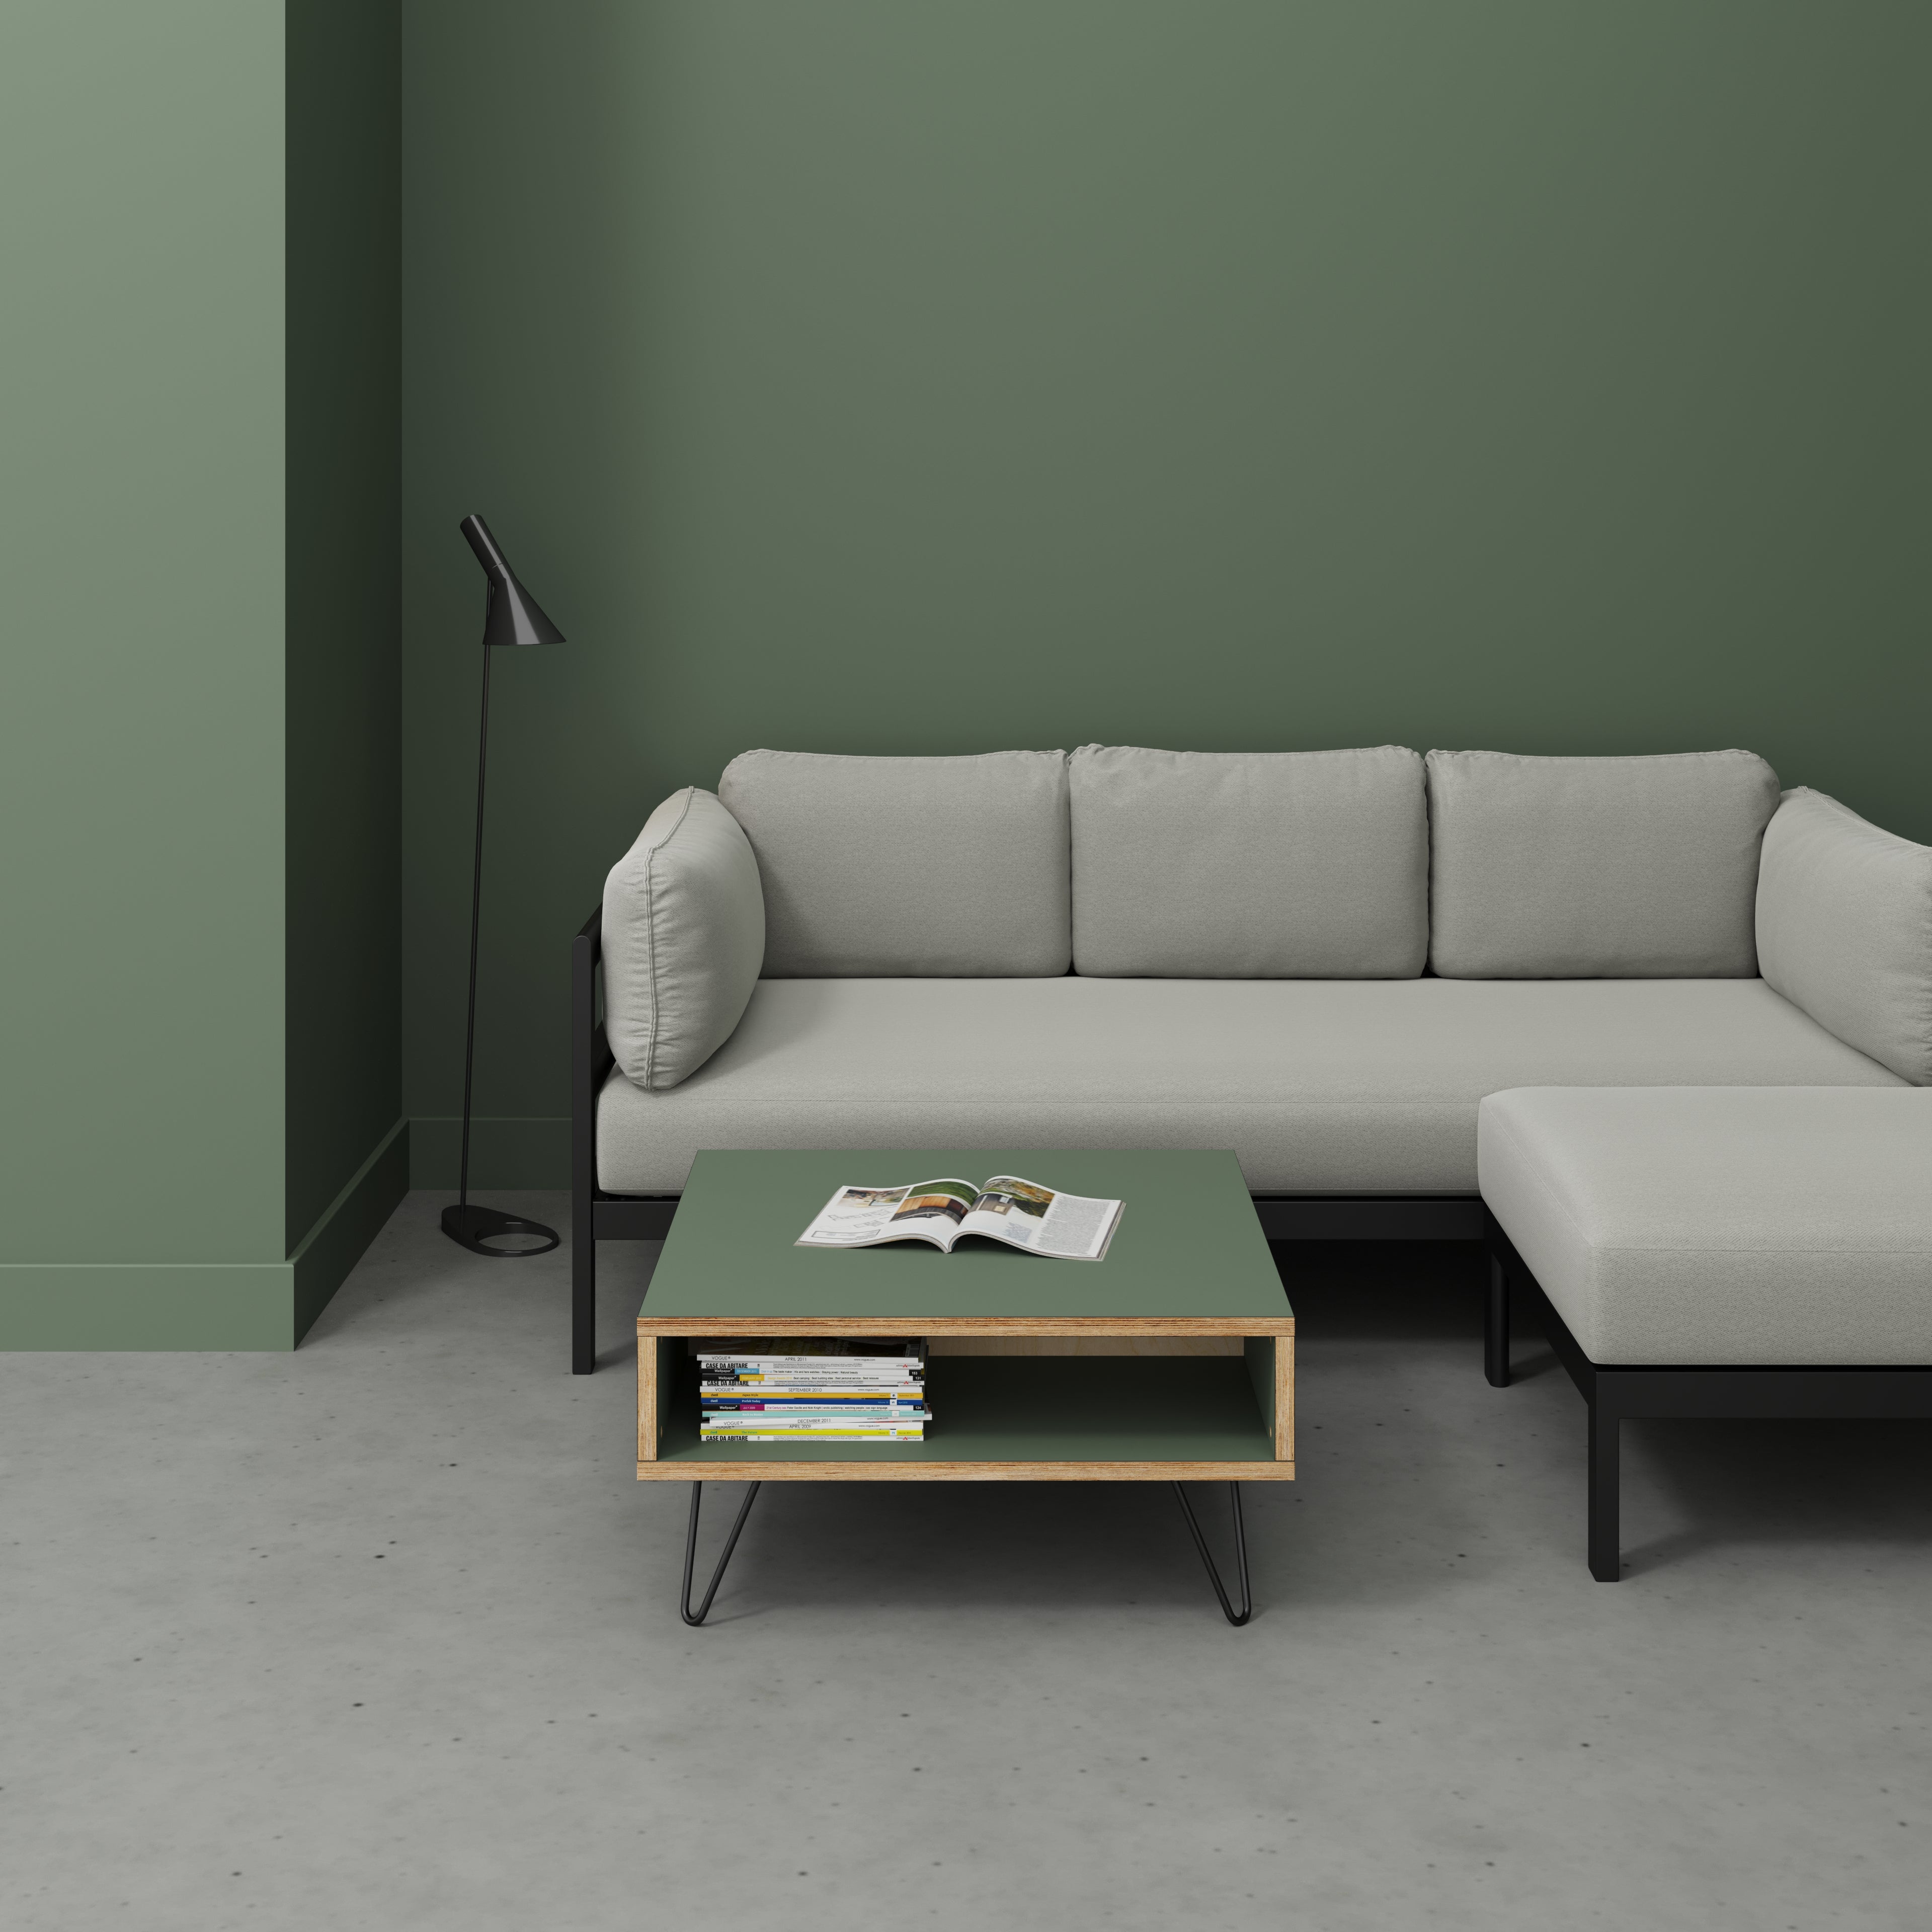 Coffee Table with Box Storage and Black Hairpin Legs - Formica Green Slate - 800(w) x 800(d) x 400(h)